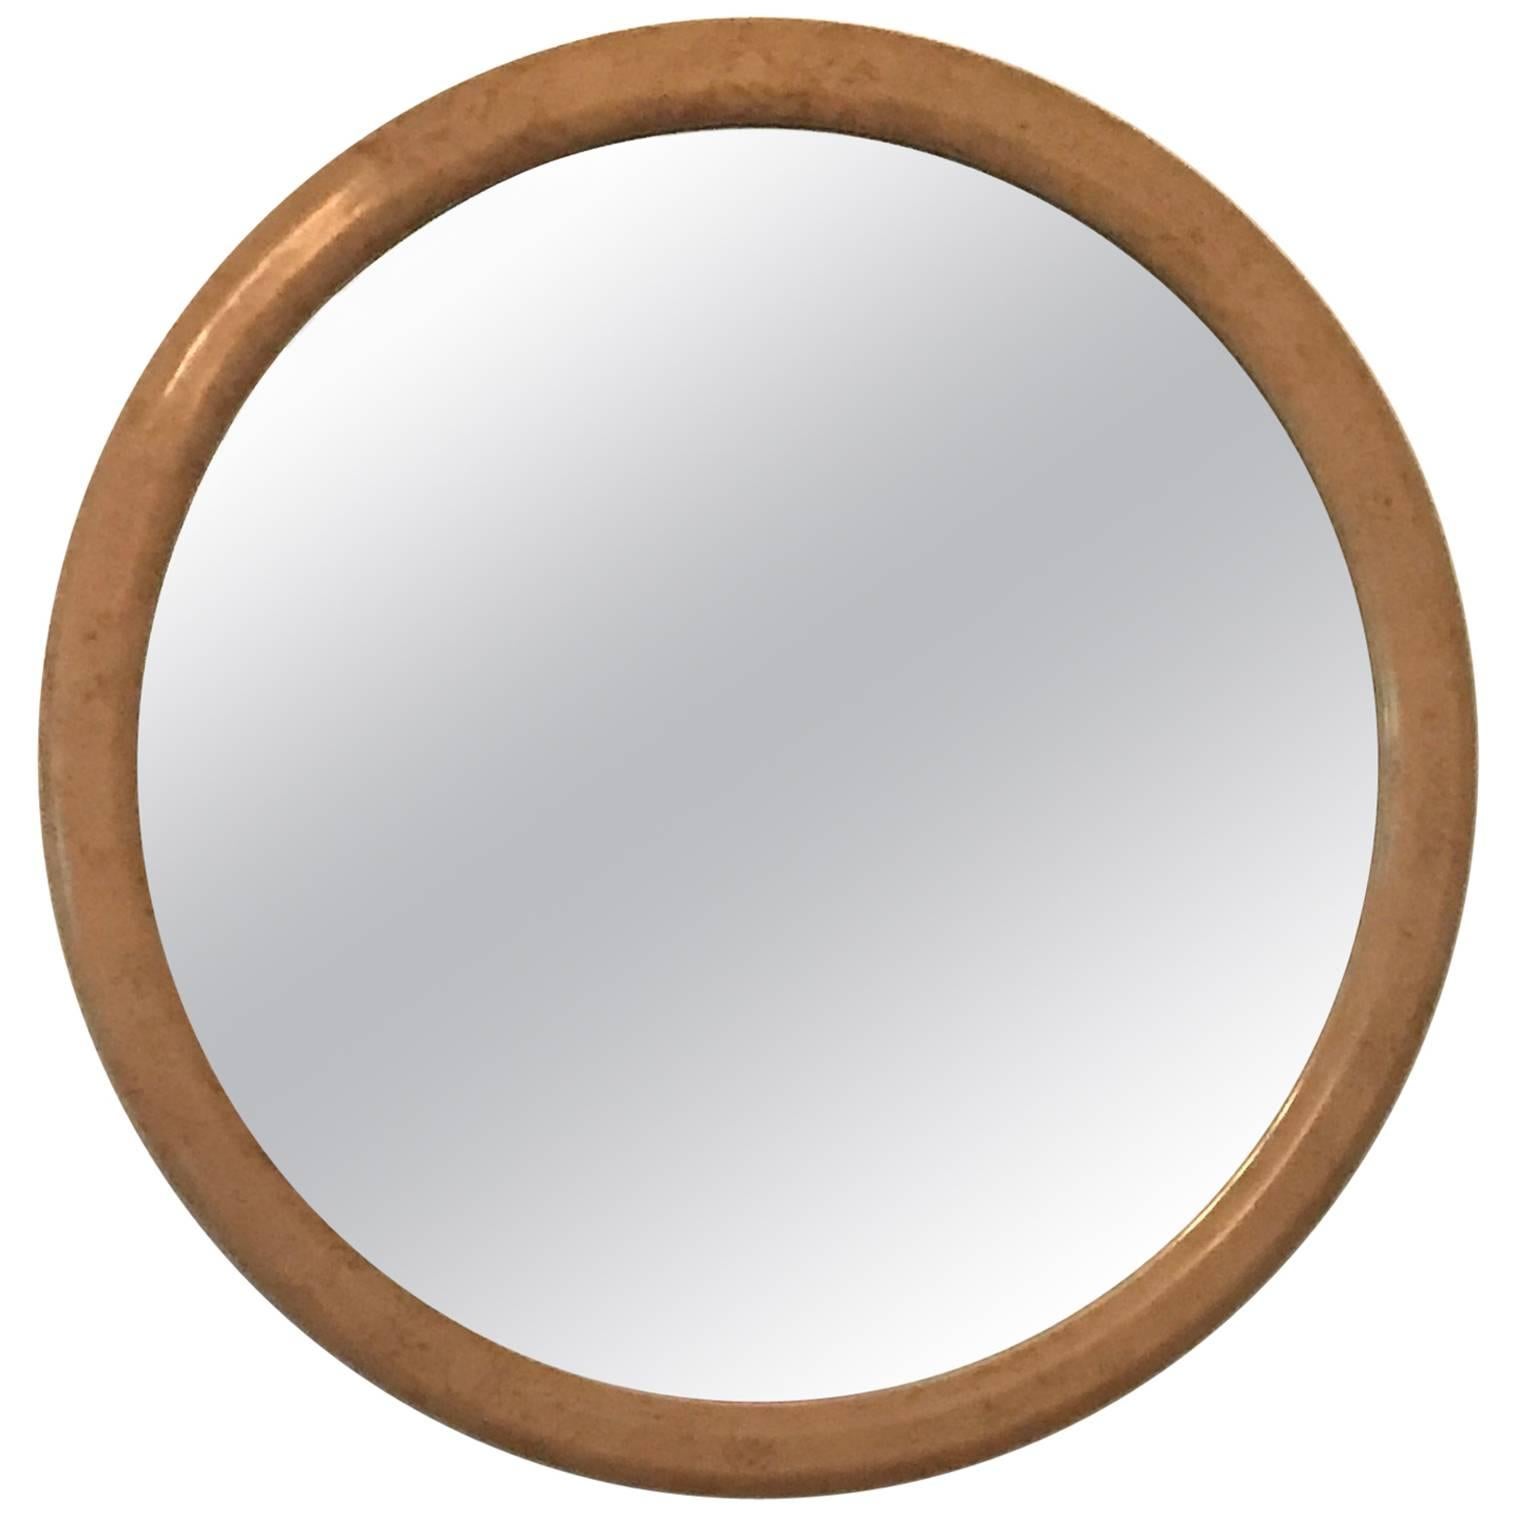 Round Faux Goatskin Lacquer Mirror from Custom-Made Master Bedroom Suite